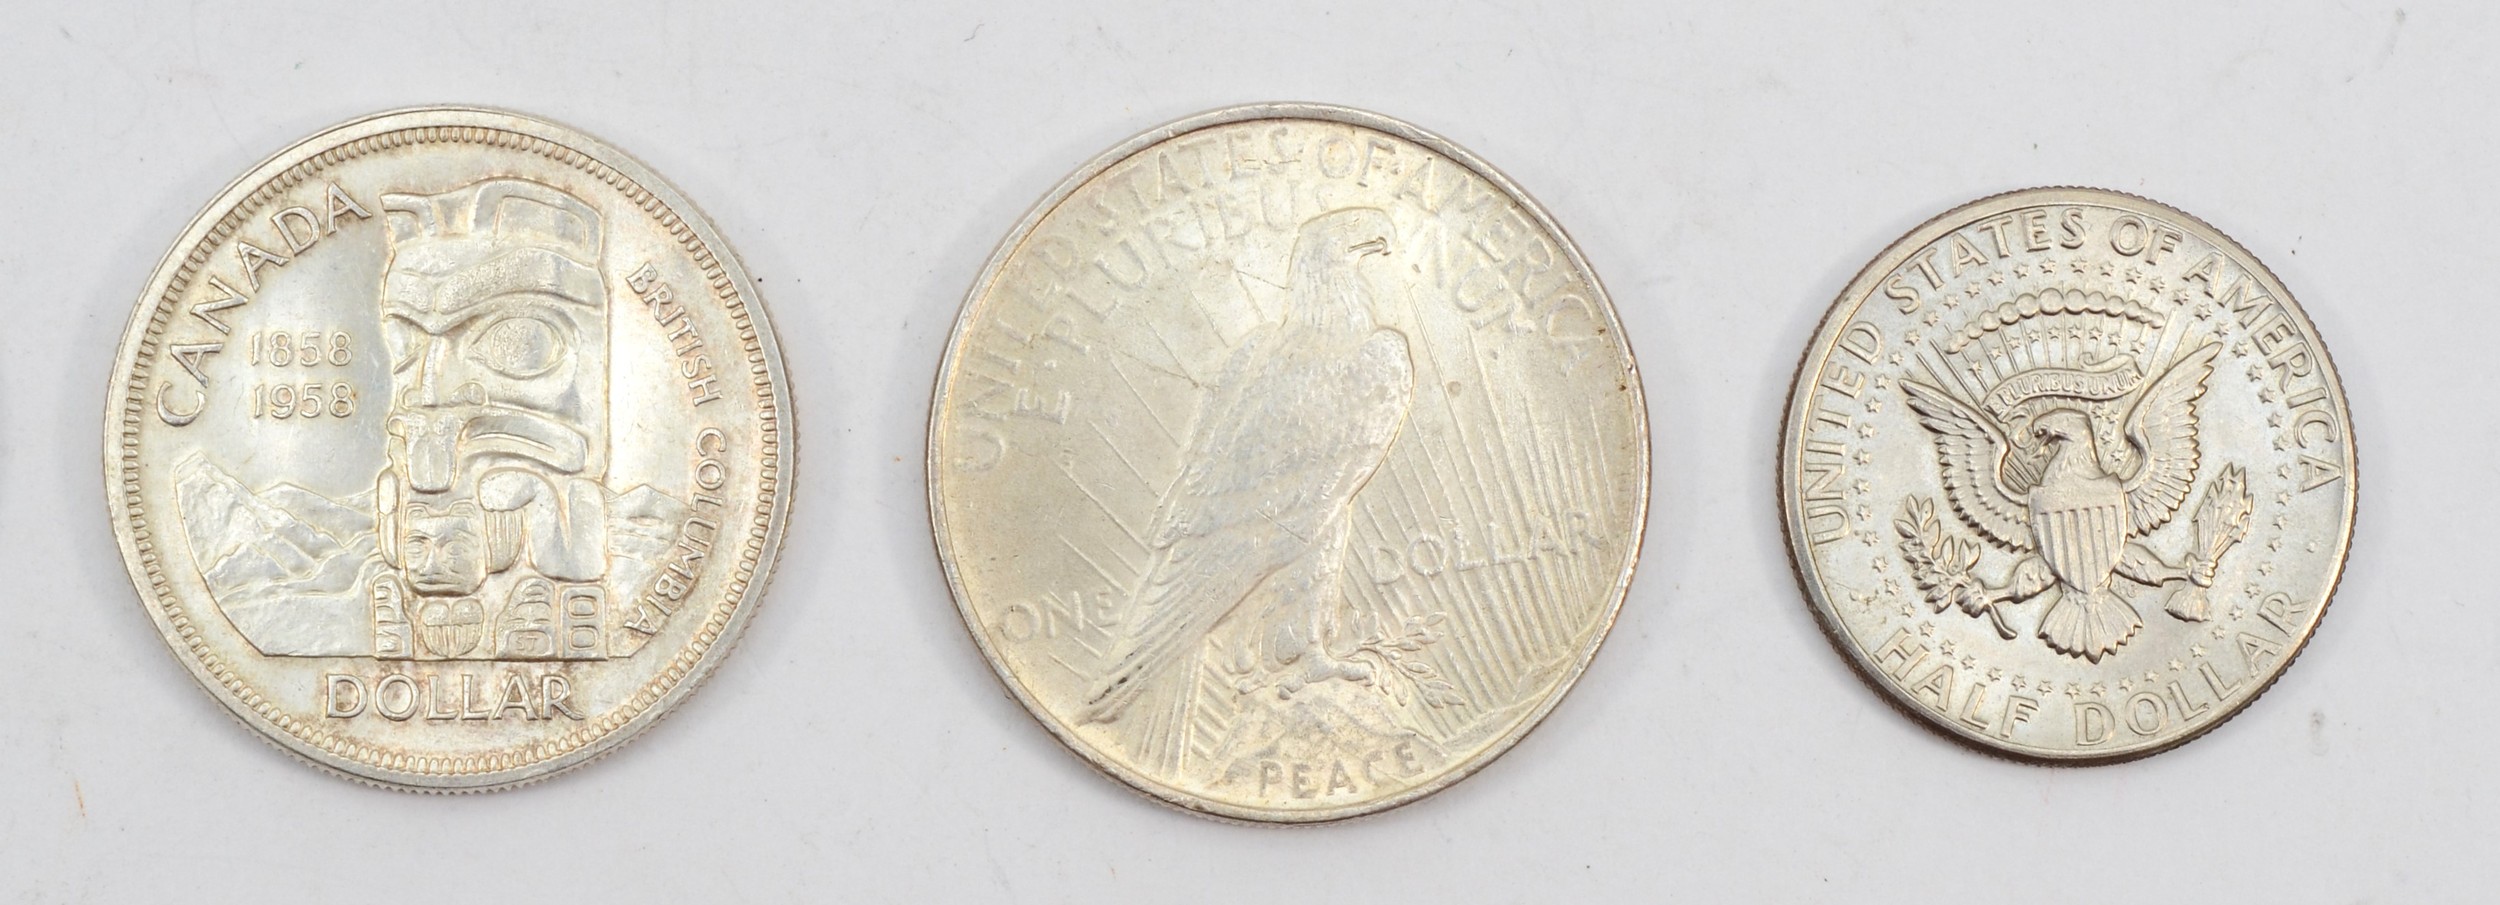 Two 1922 silver low relief peace dollars, a 1972 Kennedy half dollar, a silver Canadian totem pole - Image 6 of 8